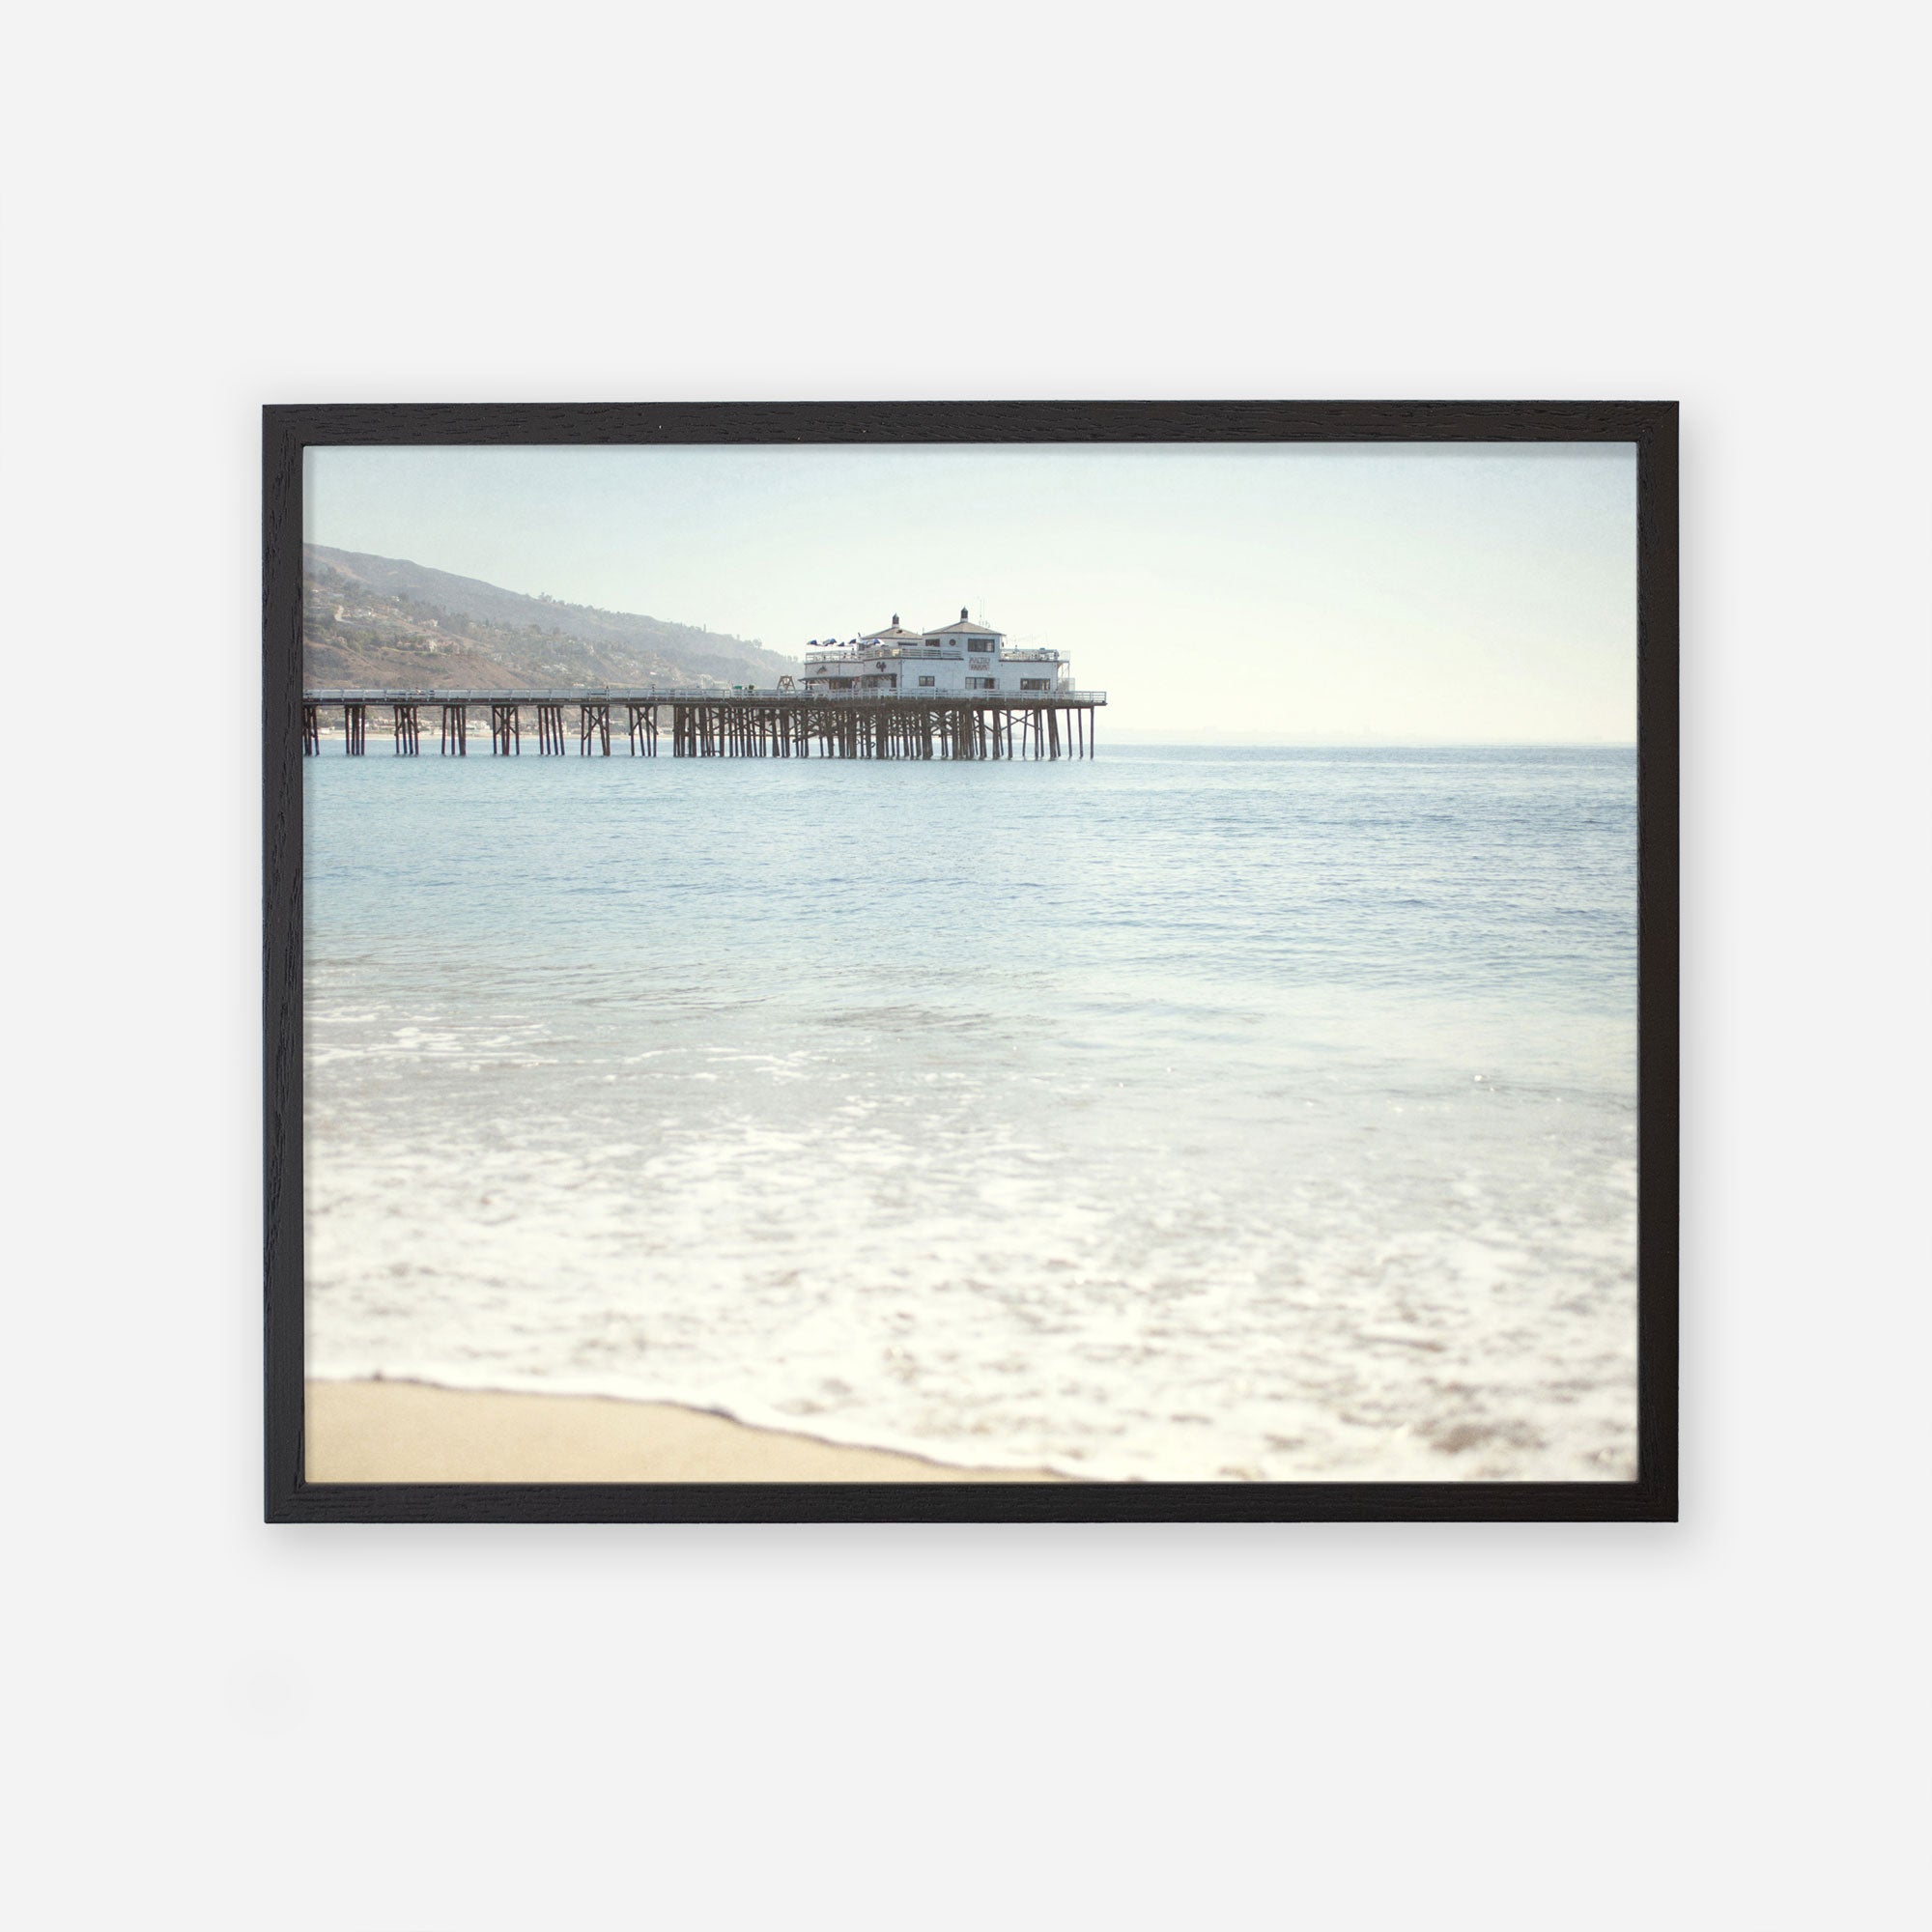 A framed photograph of a serene beach scene, showcasing gentle waves washing ashore with Malibu Pier extending into the ocean, topped by a small building under a clear sky. Offley Green&#39;s California Beach Print featuring &#39;Malibu Pier&#39;.